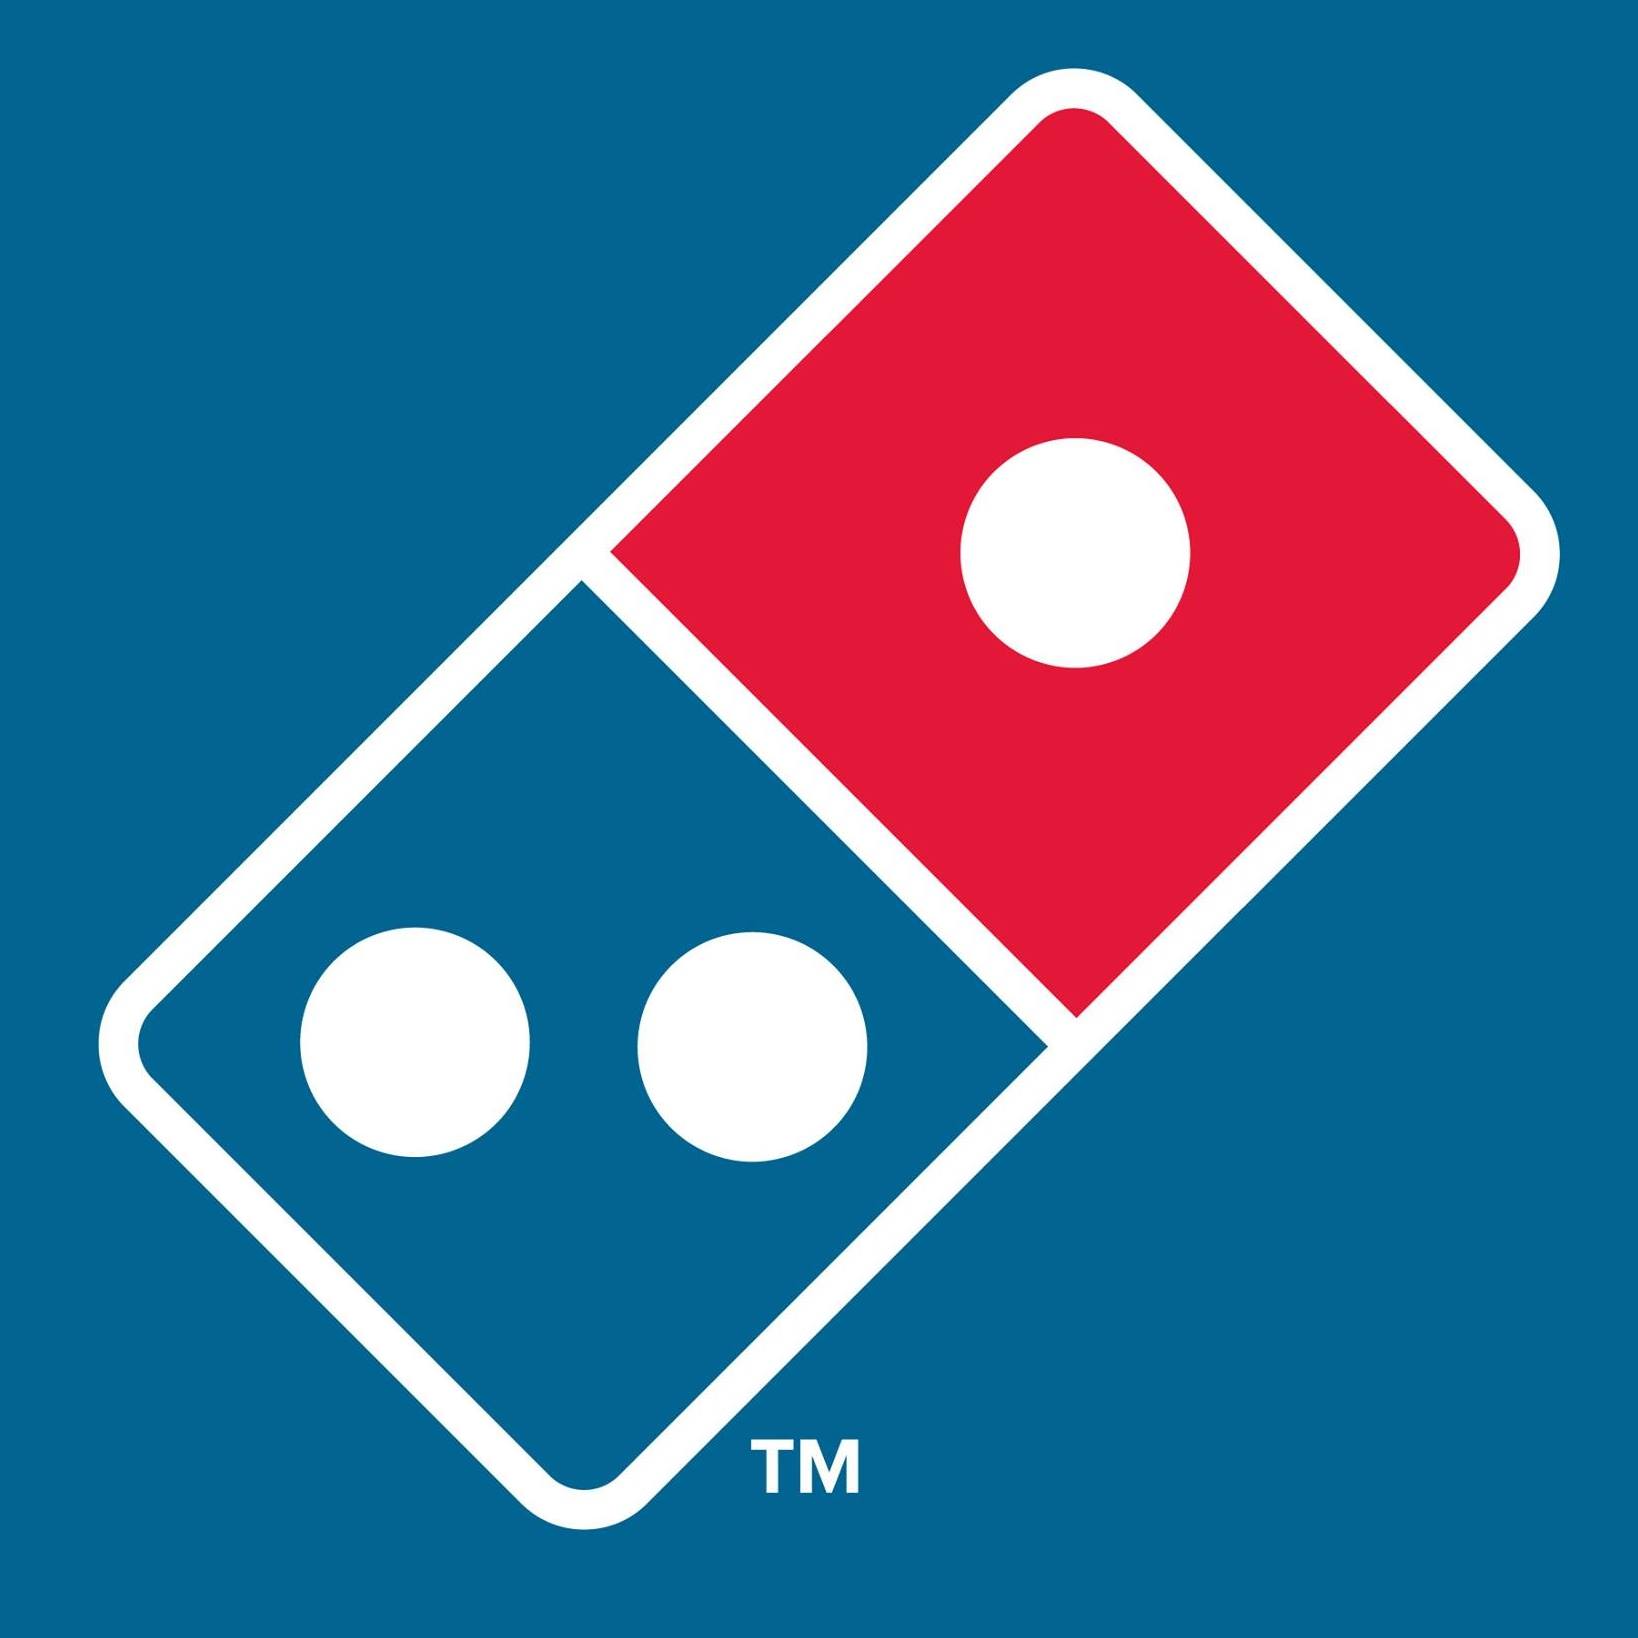 Domino's Pizza - C19 Support Visit